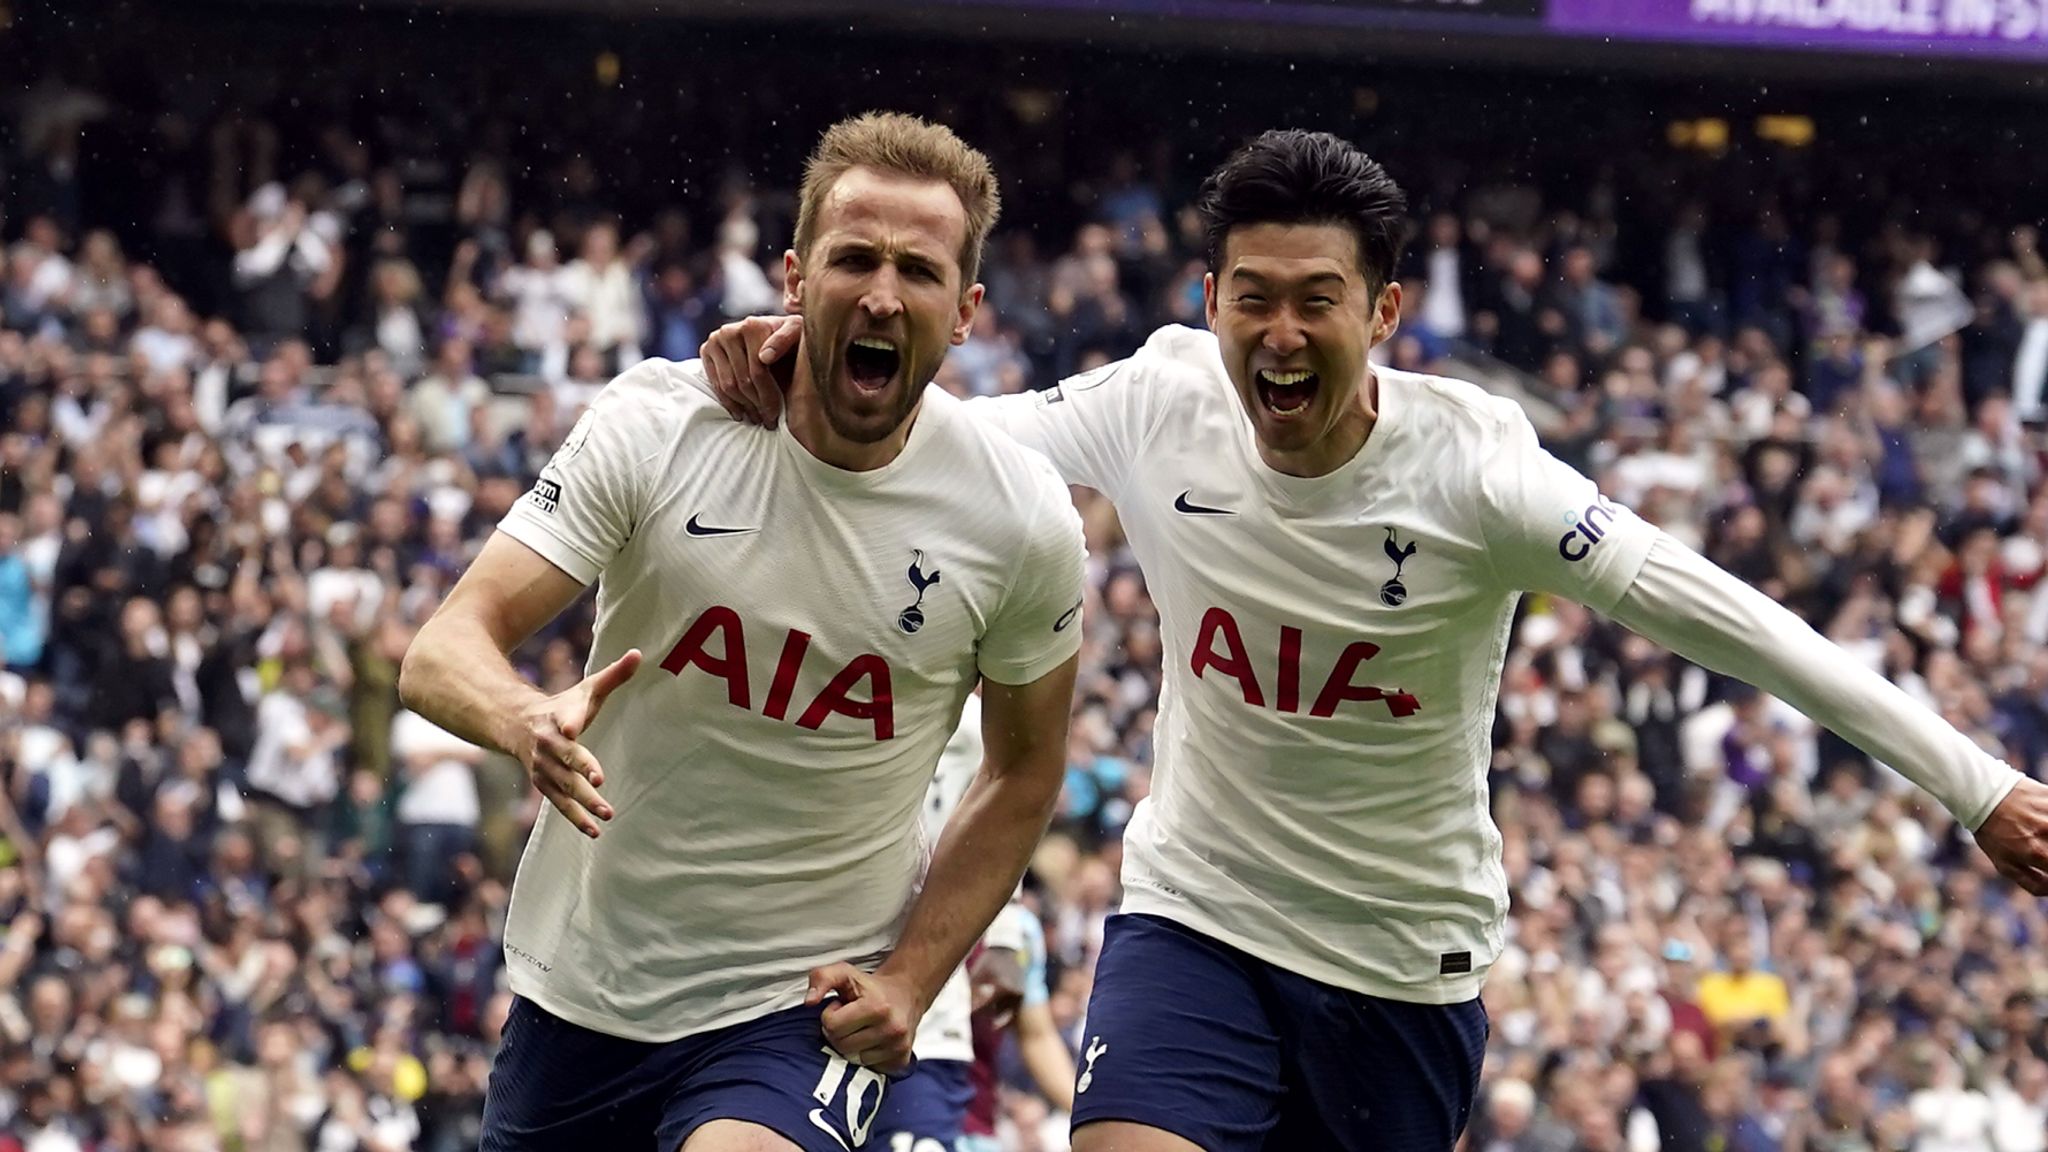 Tottenham Burnley: Harry penalty gives Spurs win boost their top-four hopes | Football News | Sky Sports